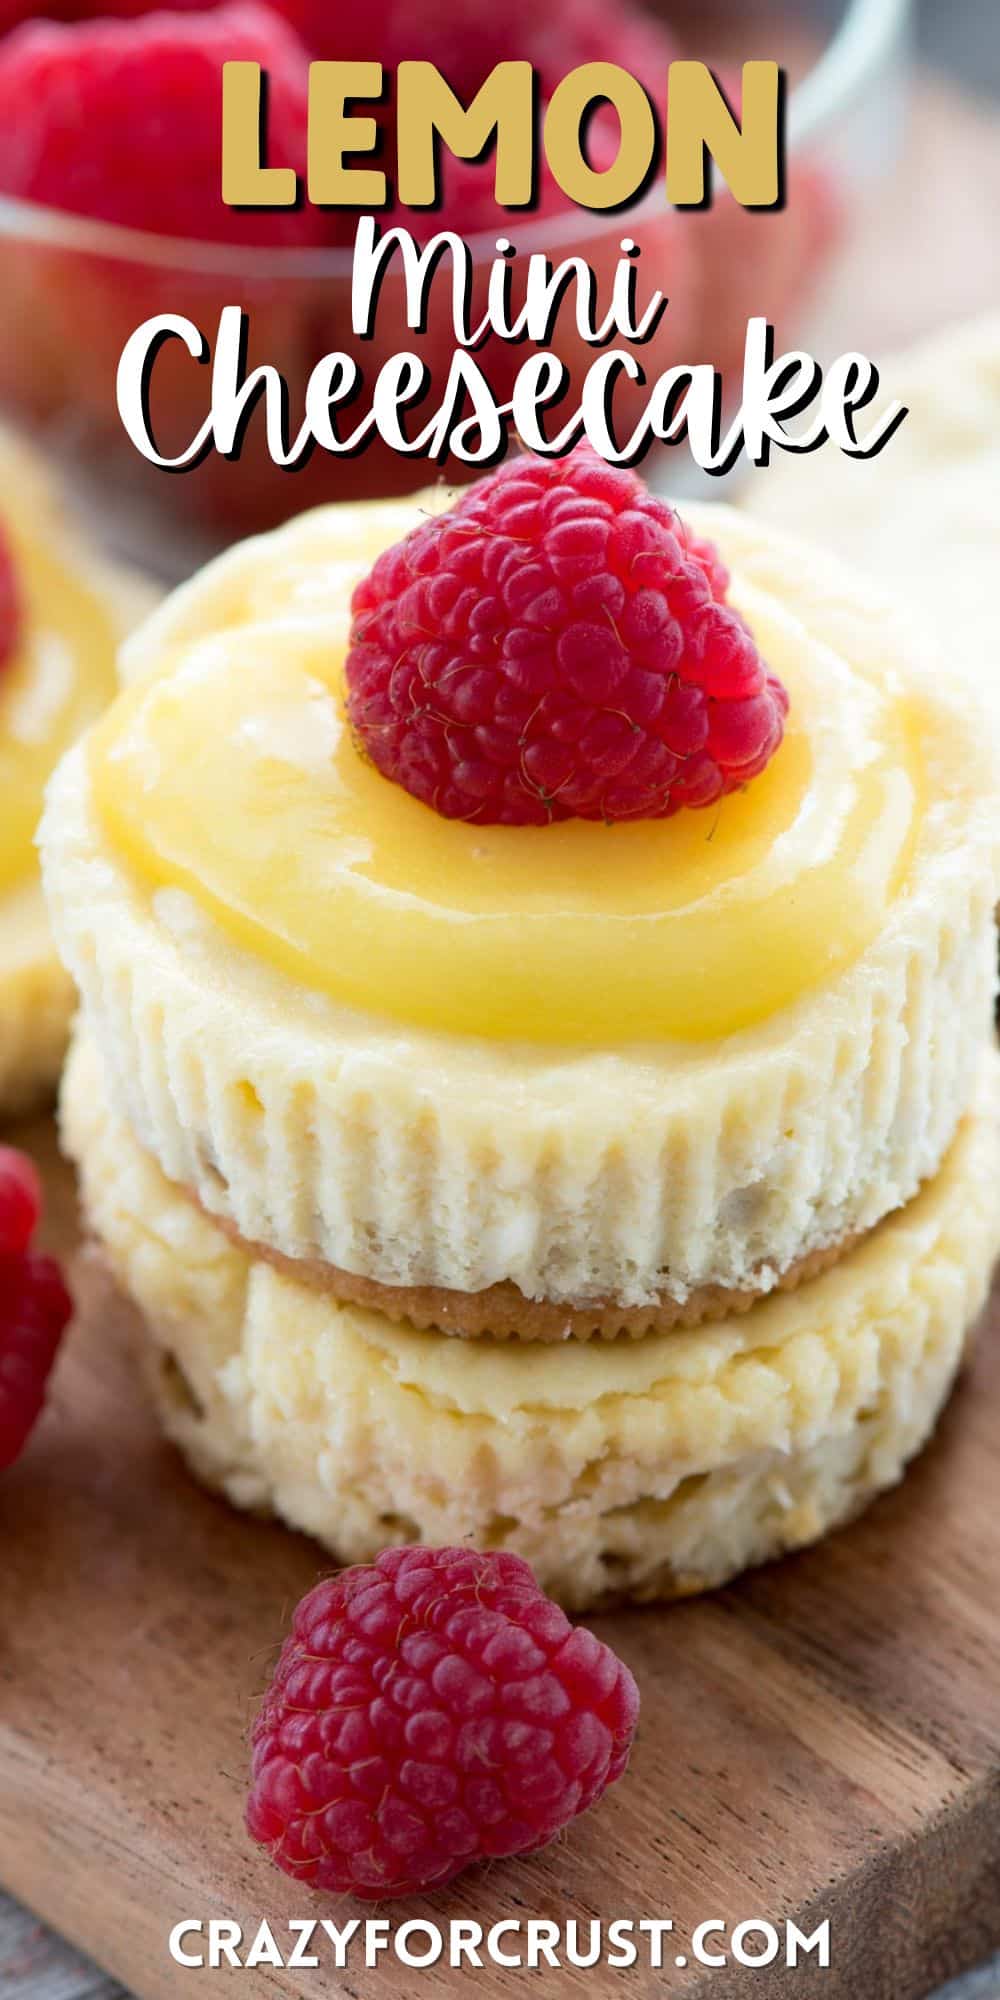 mini cheesecake with lemon curd and a raspberry on top with words on the image